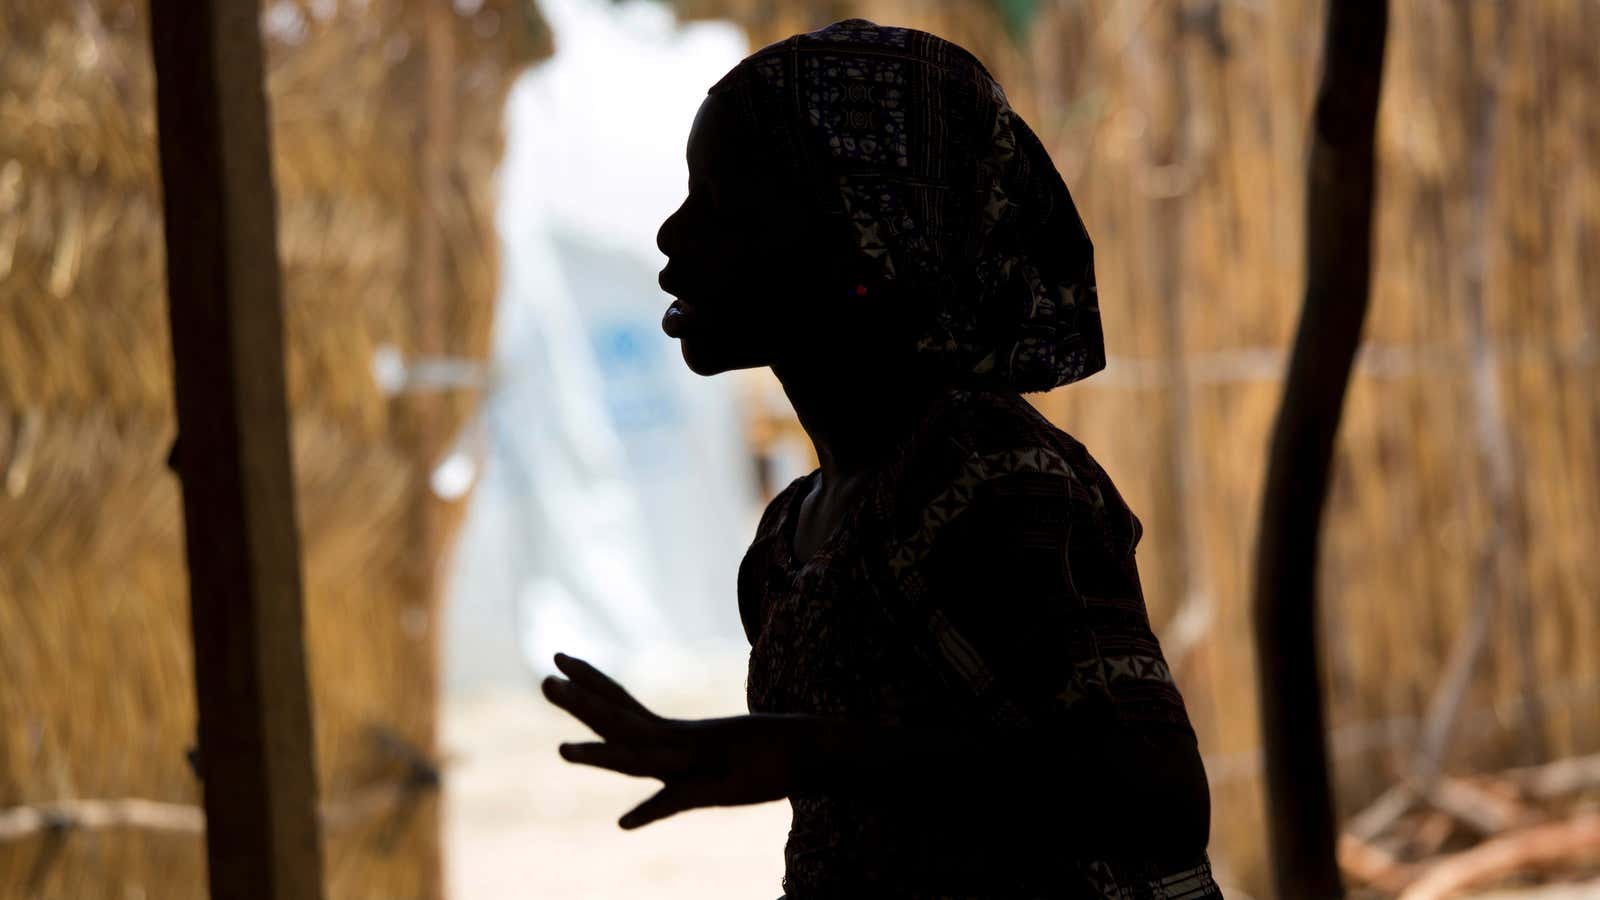 Fifteen year-old refugee Fati, is pictured at the Minawao refugee camp in Northern Cameroon